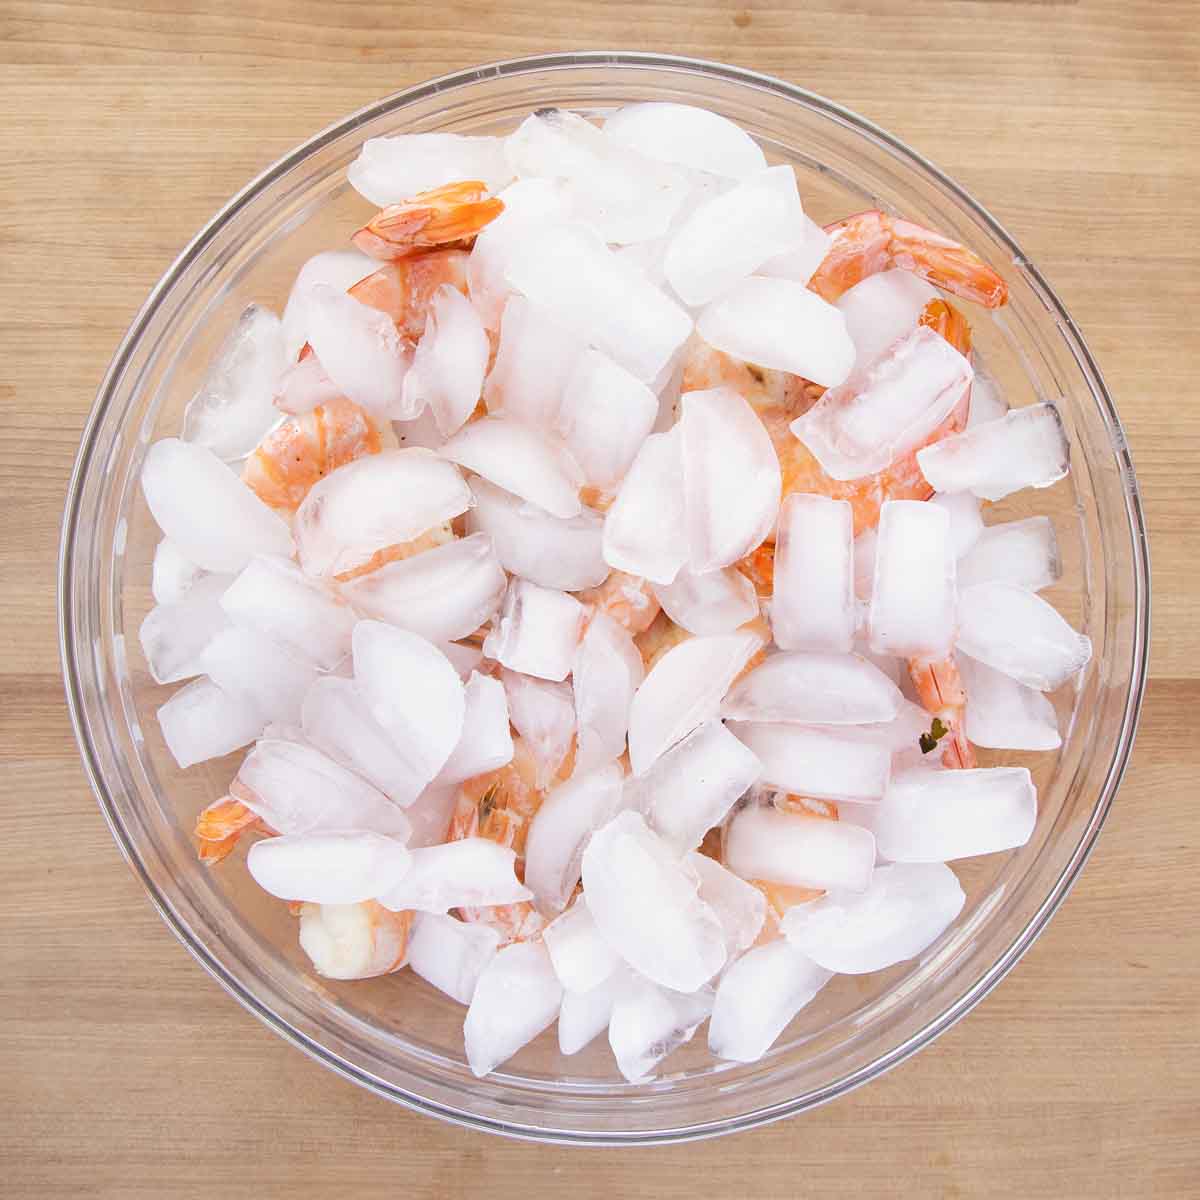 shrimp and ice in a large bowl